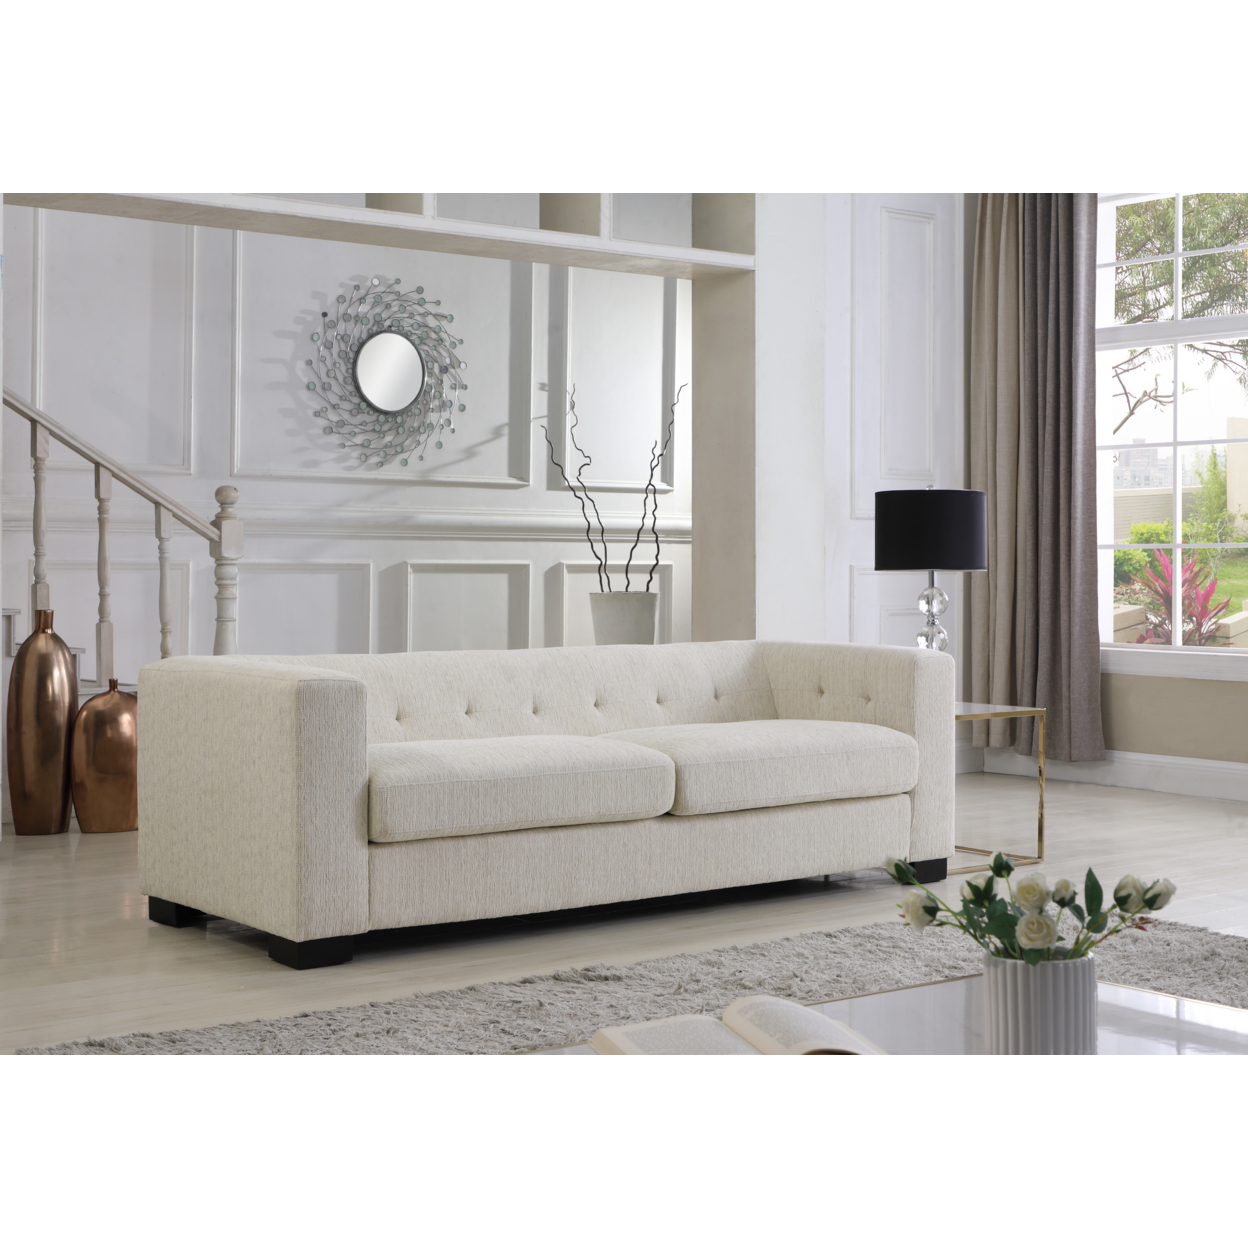 FÃ¼rth Sofa Plush Chenille Upholstery Espresso Finished Wood Legs - Grey